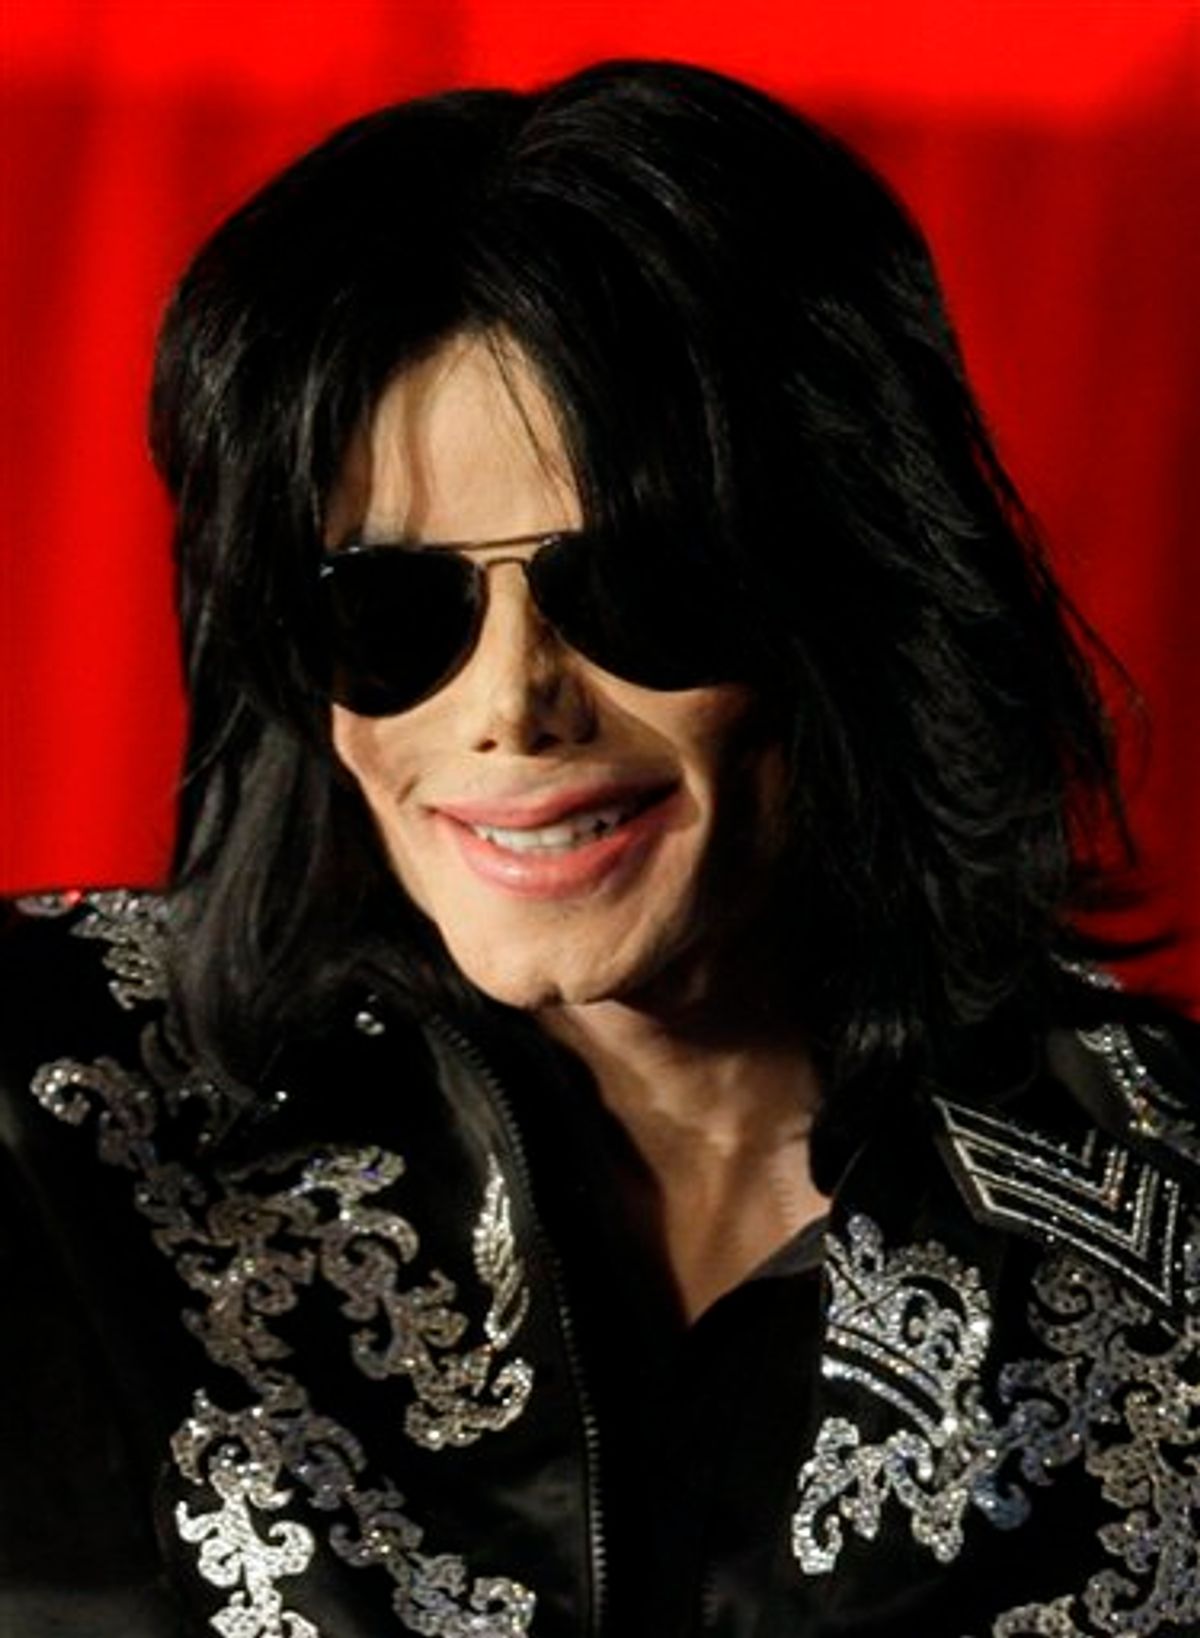 FILE - In this March 5, 2009 file photo, US singer Michael Jackson is shown at a press conference in London.  (AP Photo/Joel Ryan, file)    (AP)